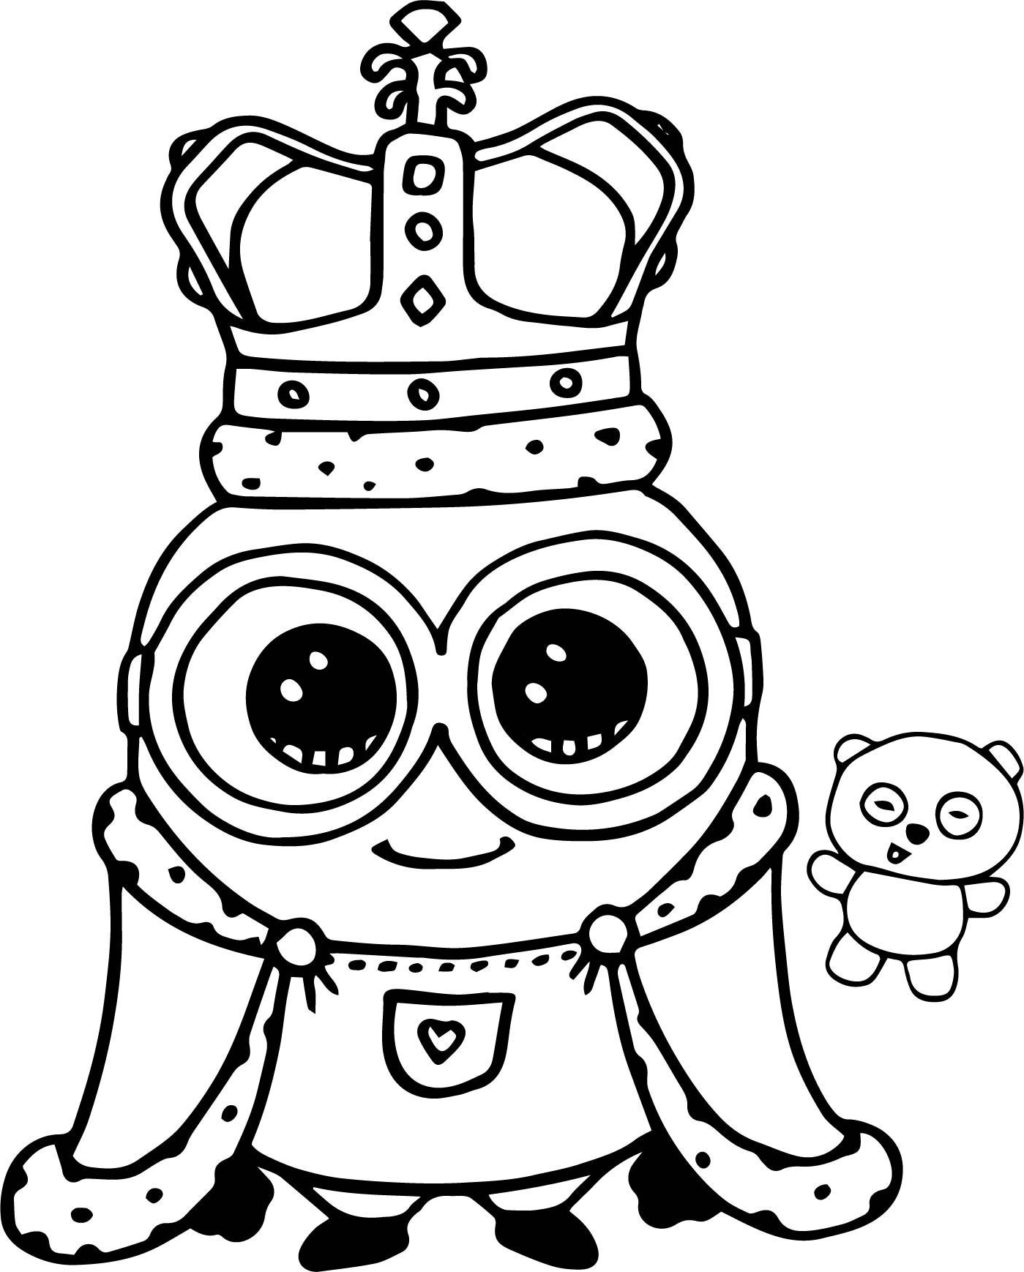 Despicable Coloring Pages Coloring Book World Coloring Pages Of Minionsble Despicable Me